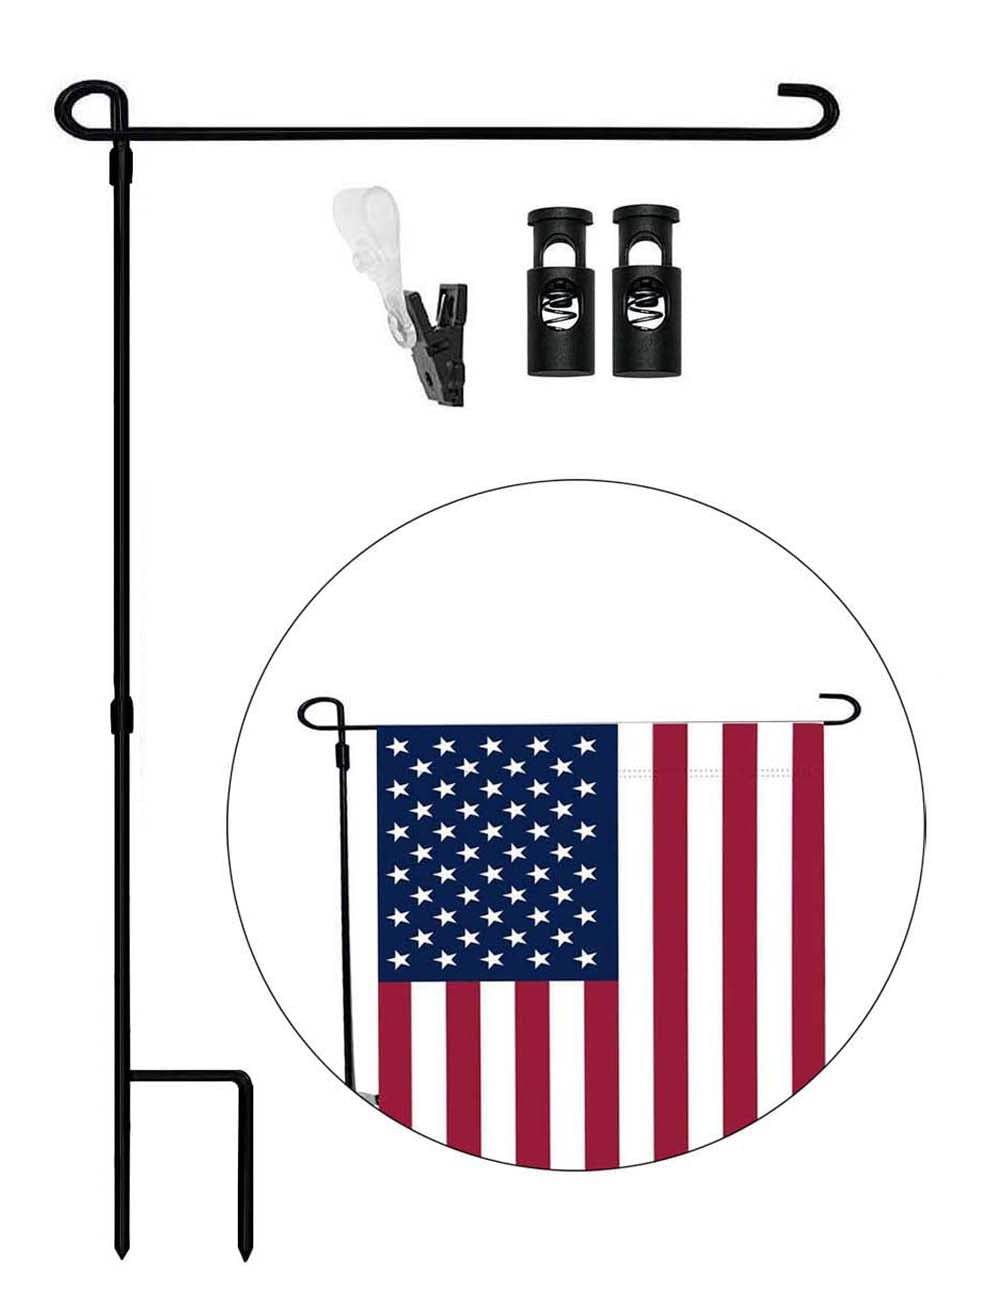 YEAHOME Garden Flag Holder Stand with American Flag Premium Powder-Coated Yard Flag Pole with Tiger Clip and Rubber Stopper for Indoor Outdoor Decoration 